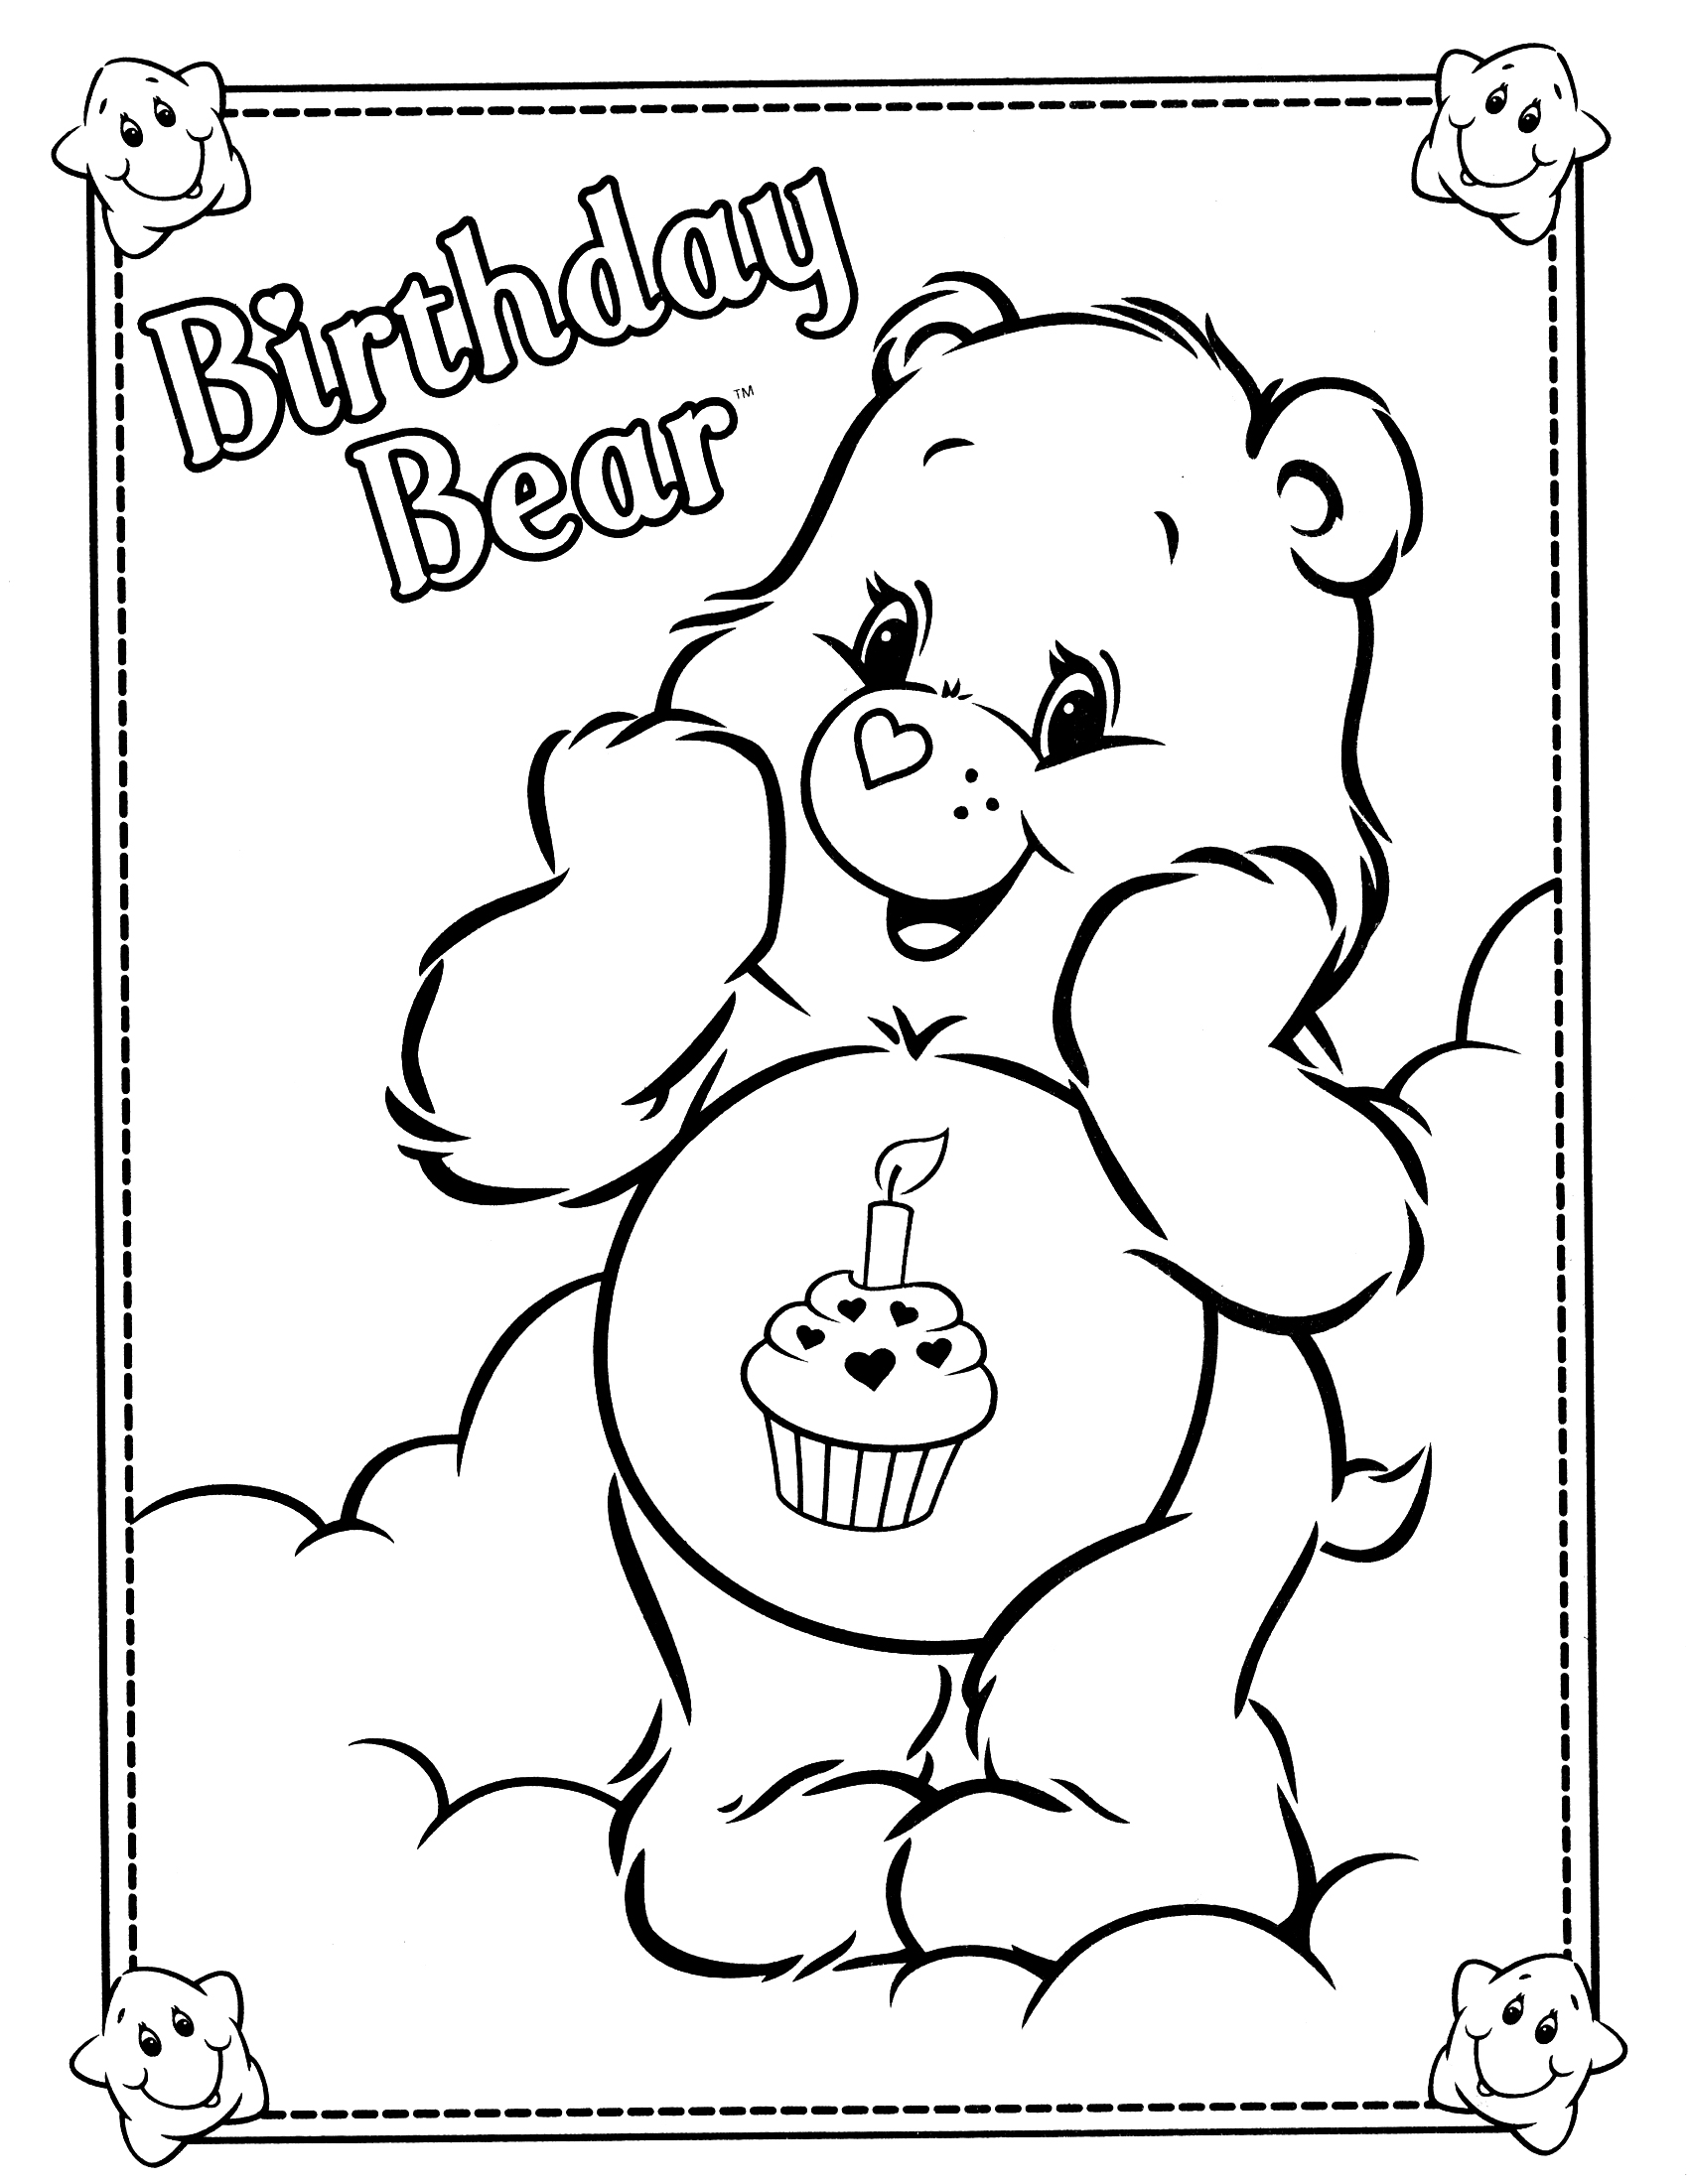 care-bear-coloring-pages-to-download-and-print-for-free